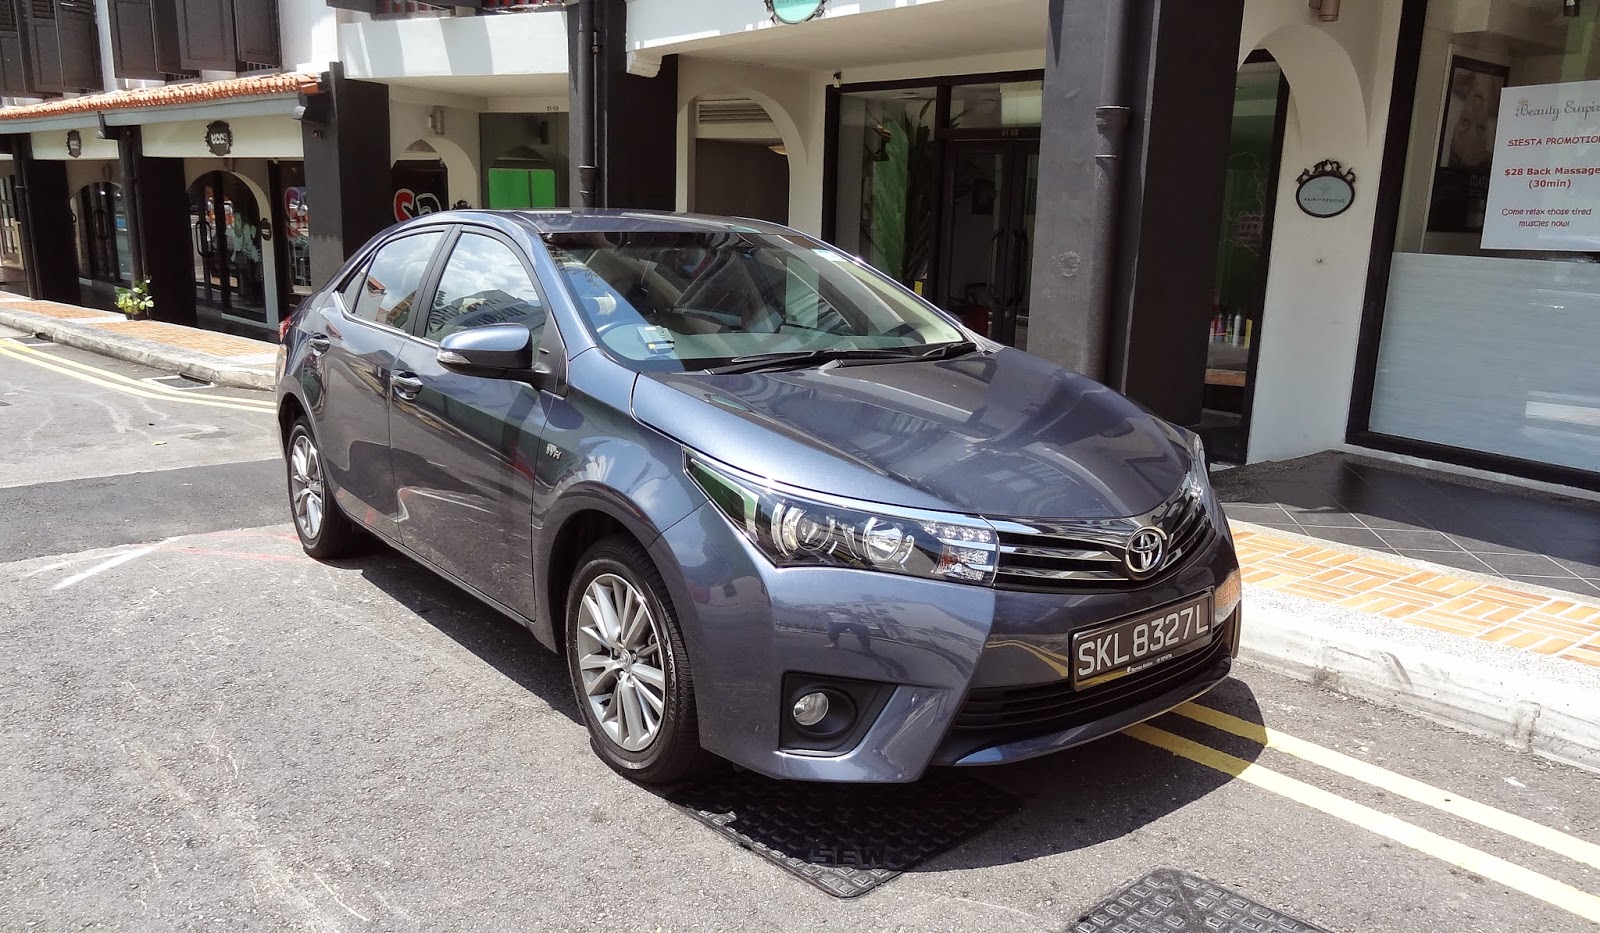 Shaun Owyeong: The All-New Toyota Corolla Altis - A Legend Redefined ...